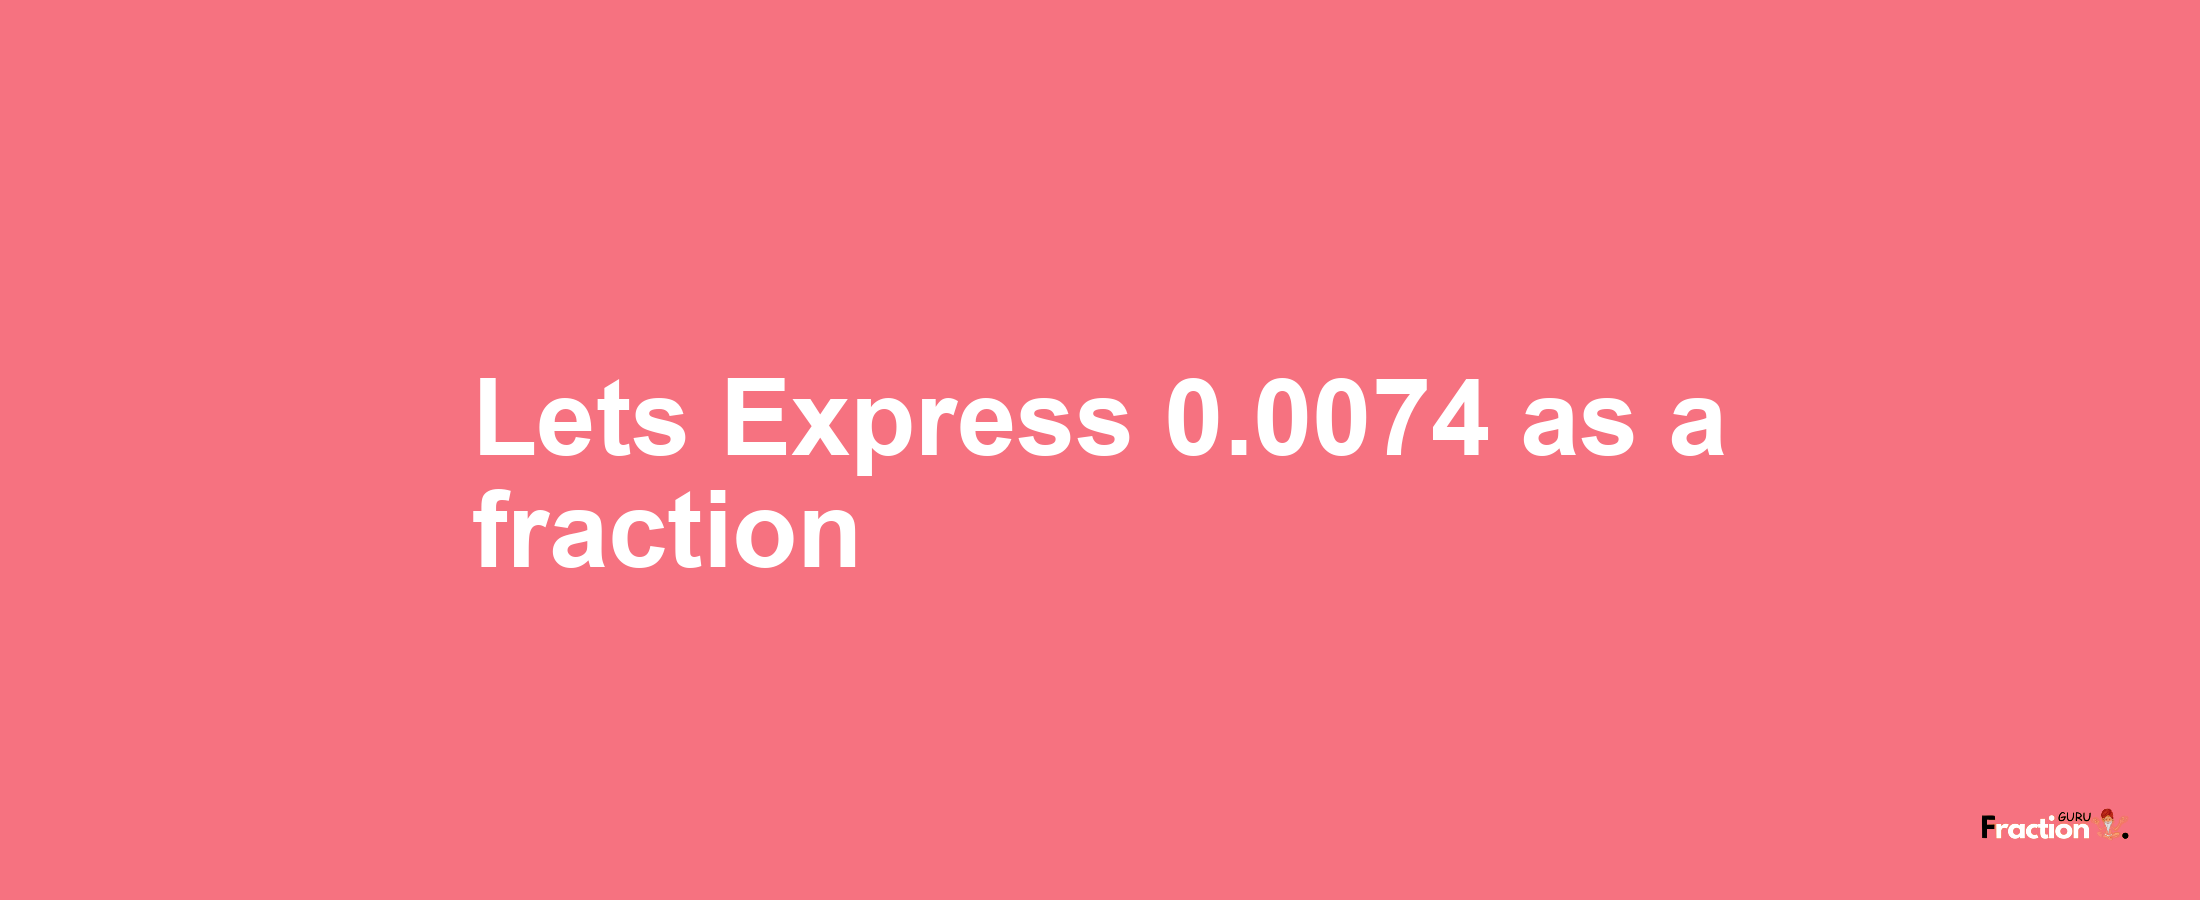 Lets Express 0.0074 as afraction